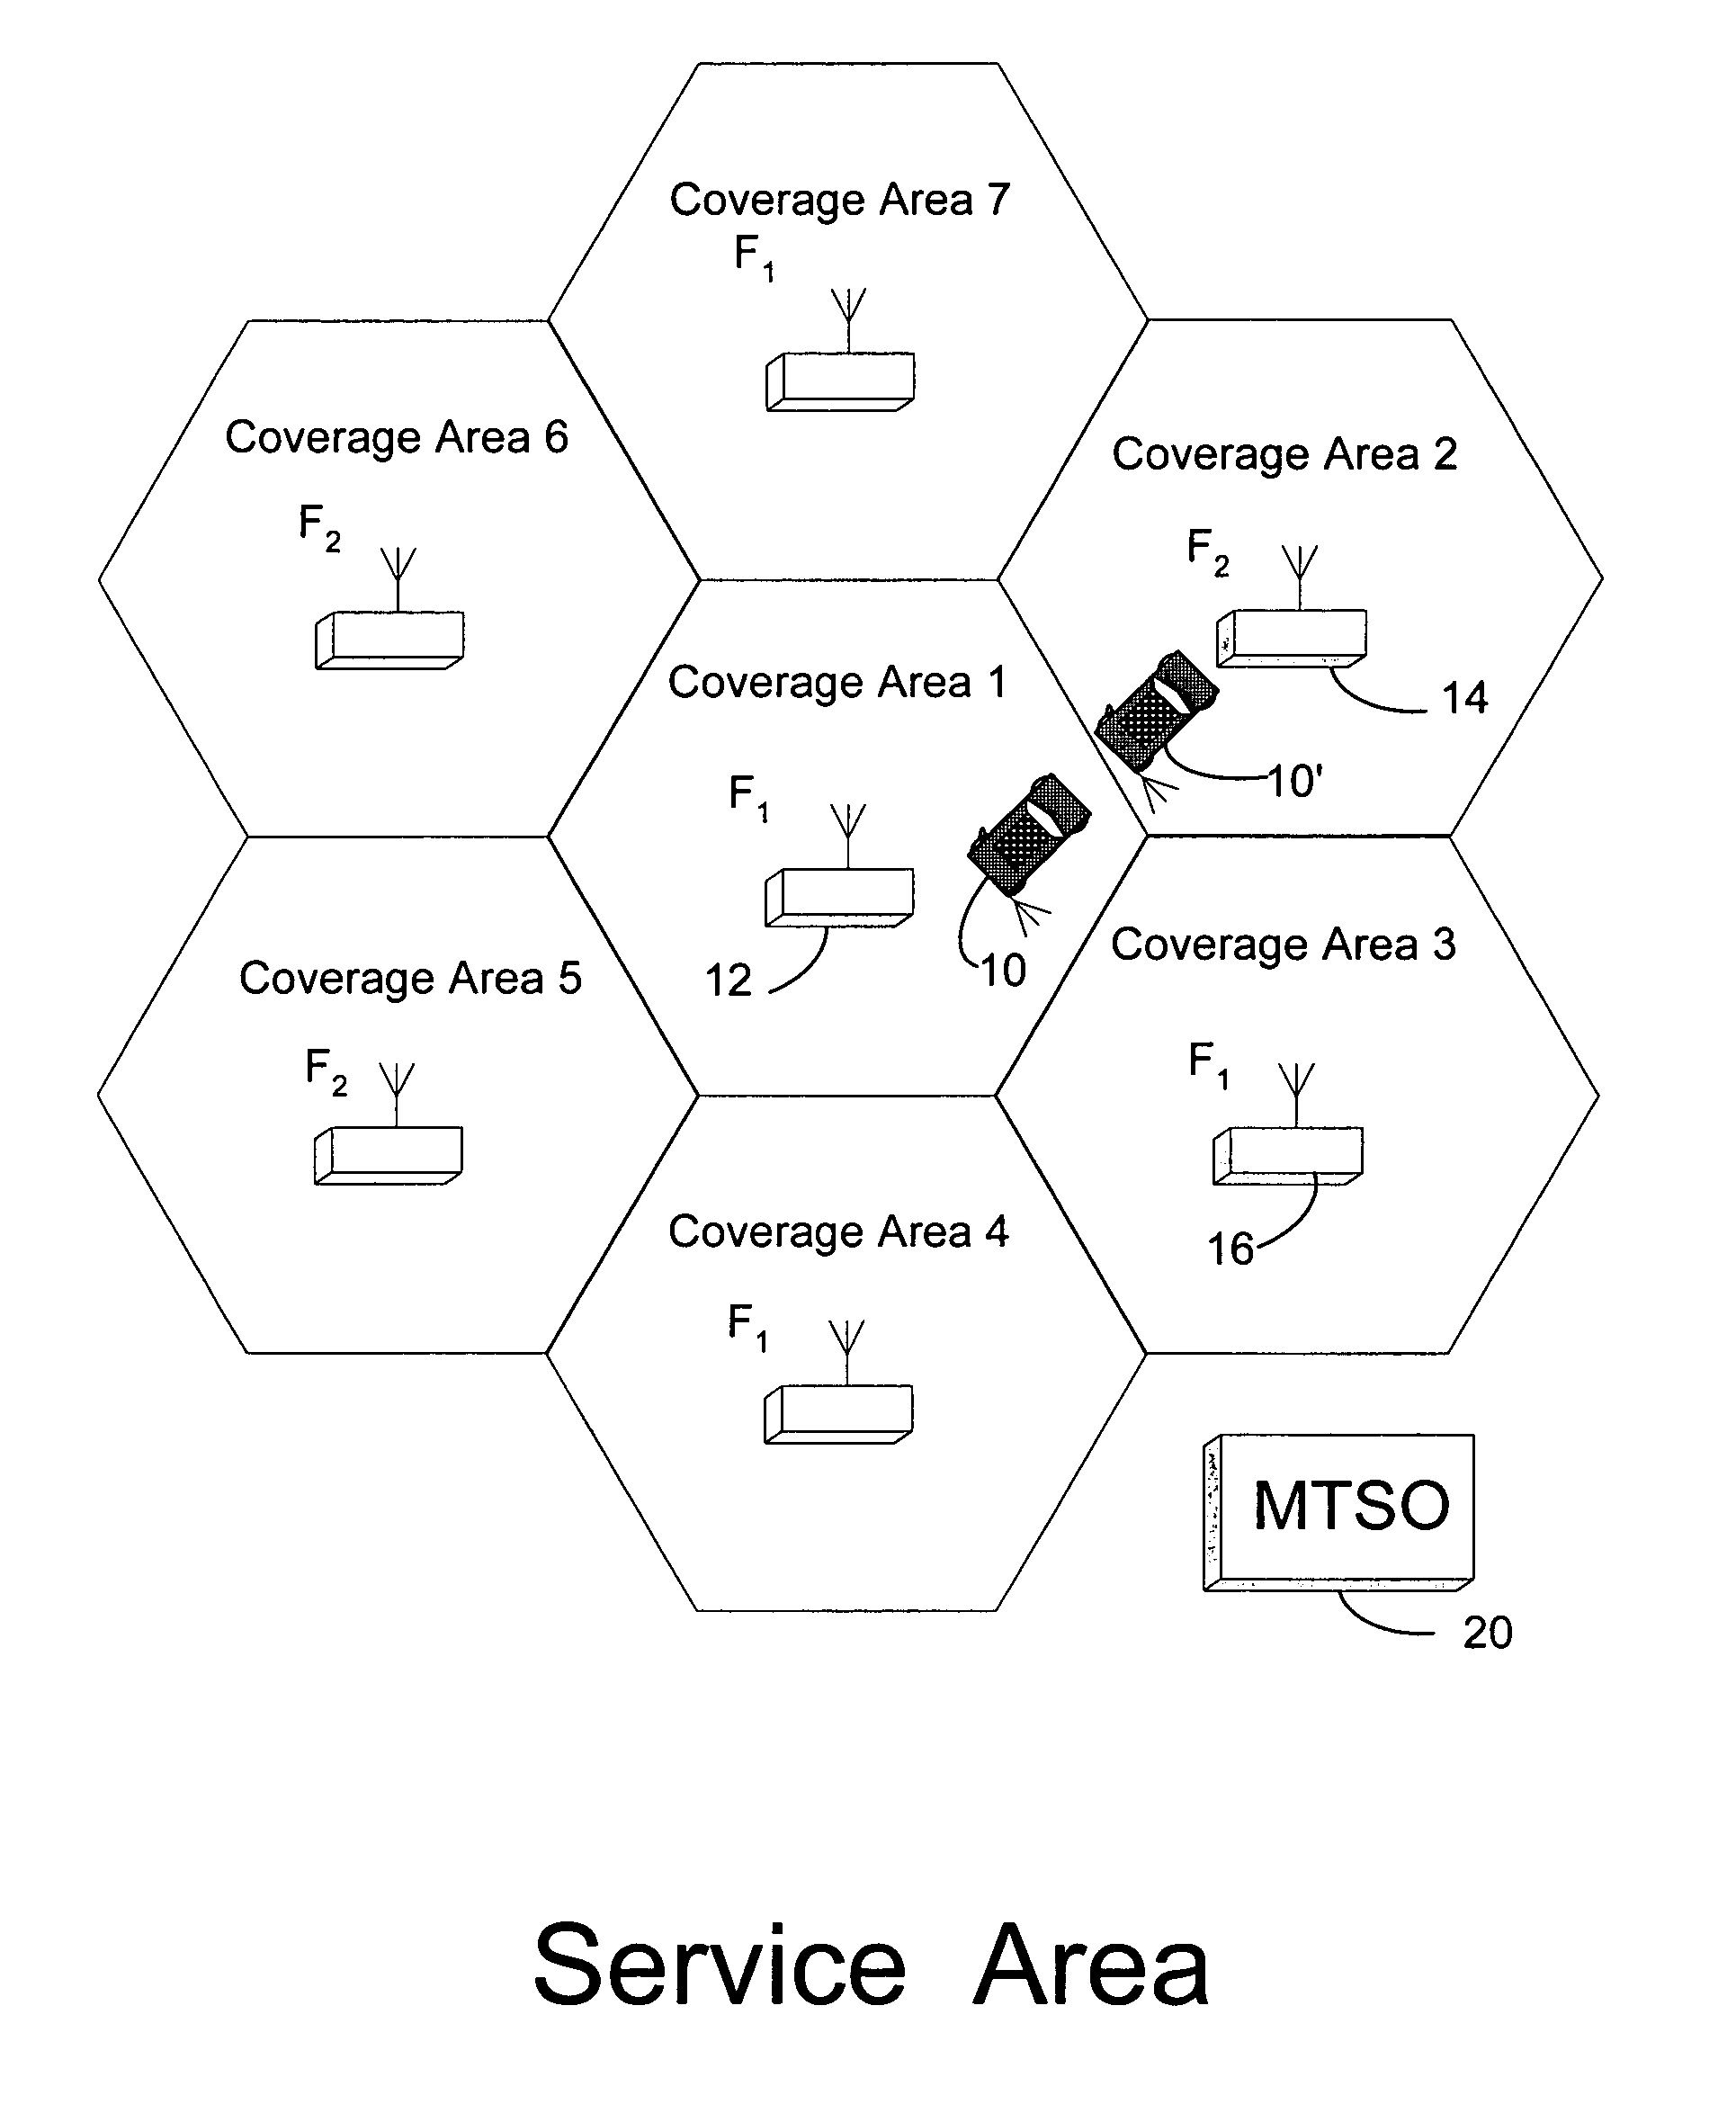 Method and apparatus for performing cell selection handoffs in a wireless communication system